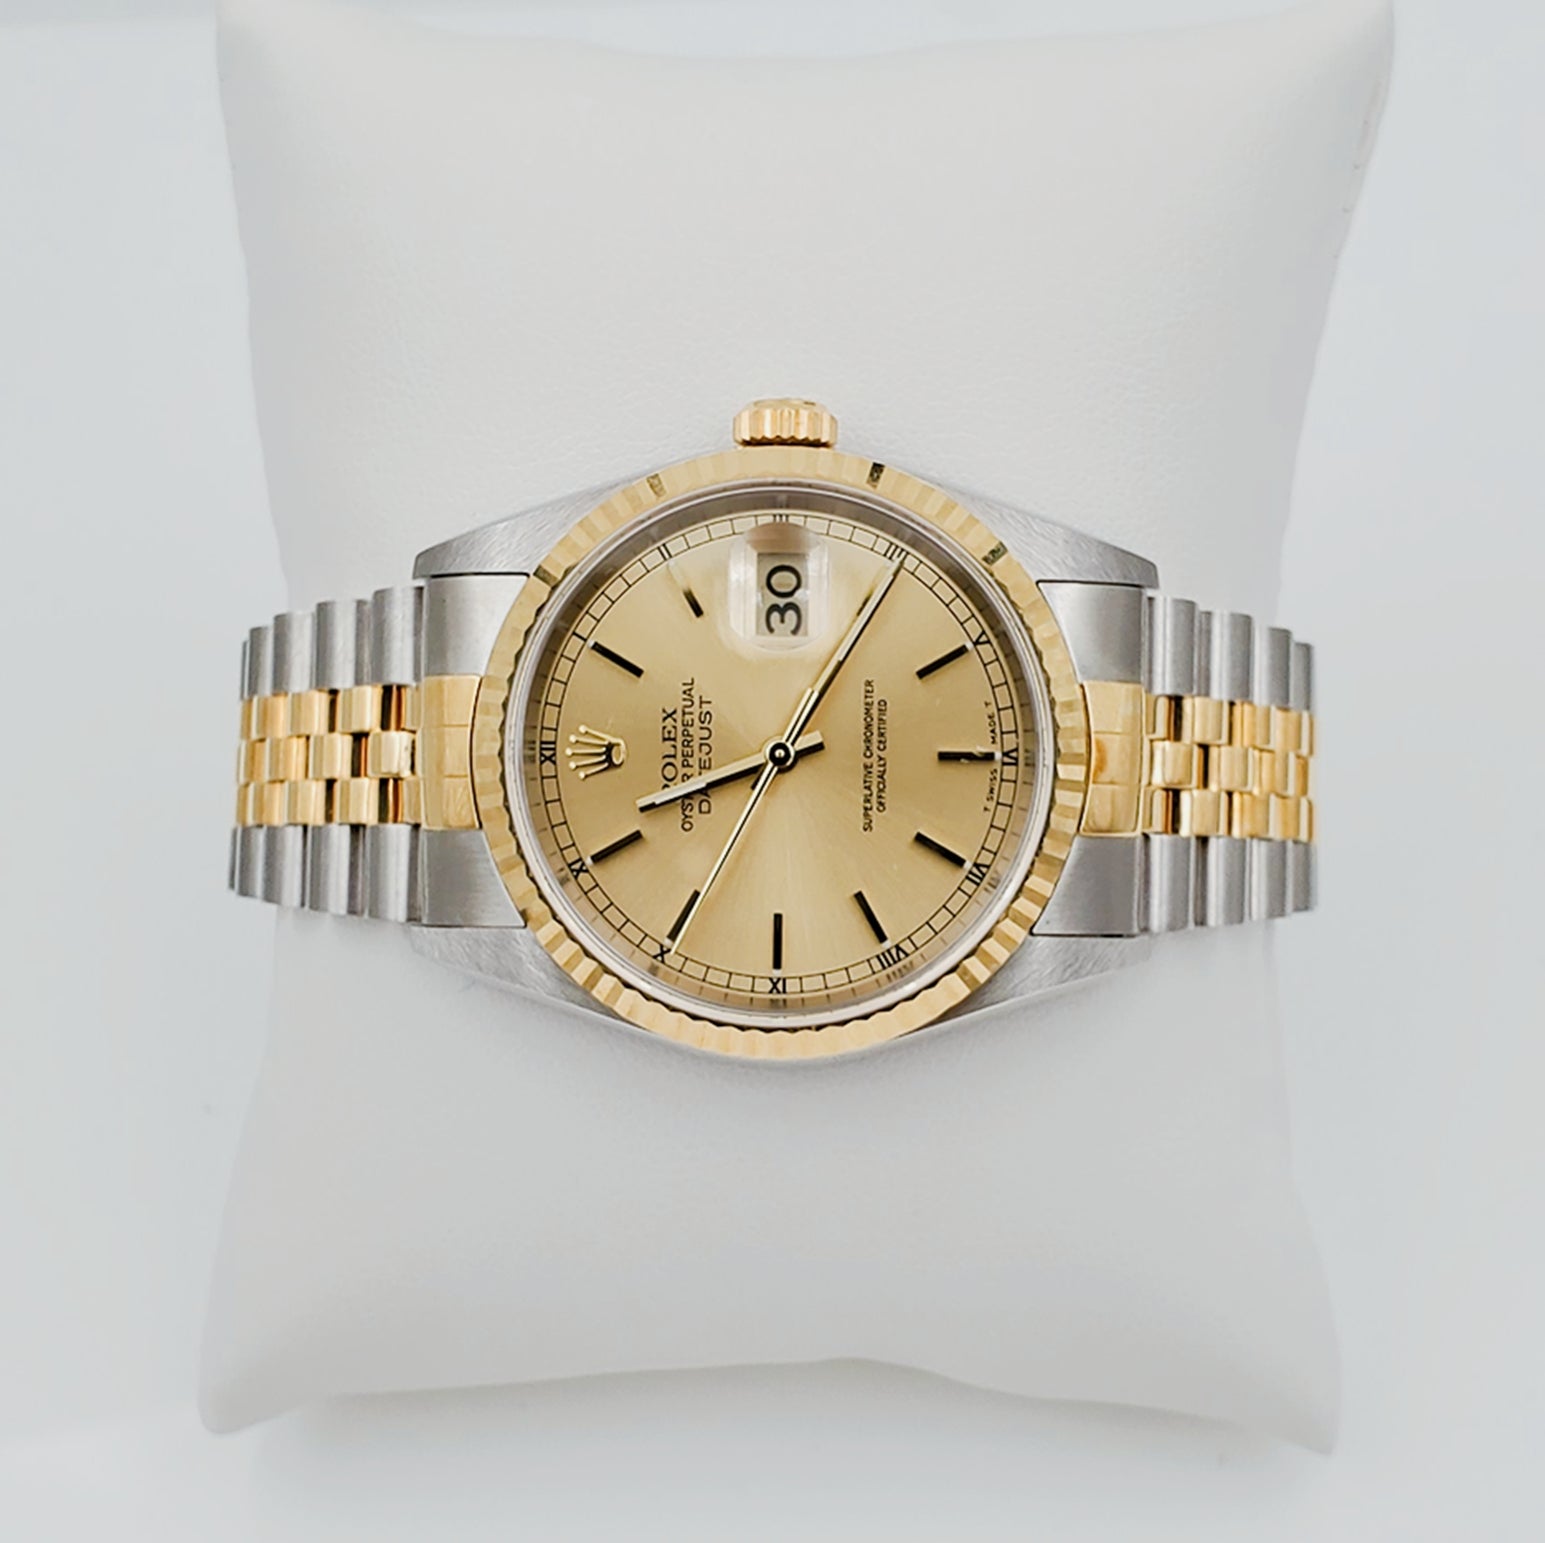 *1998 Men's Rolex 36mm DateJust 18K Gold / Stainless Steel Two Tone Watch with Fluted Bezel and Champaign Dial. (UNWORN 16233)